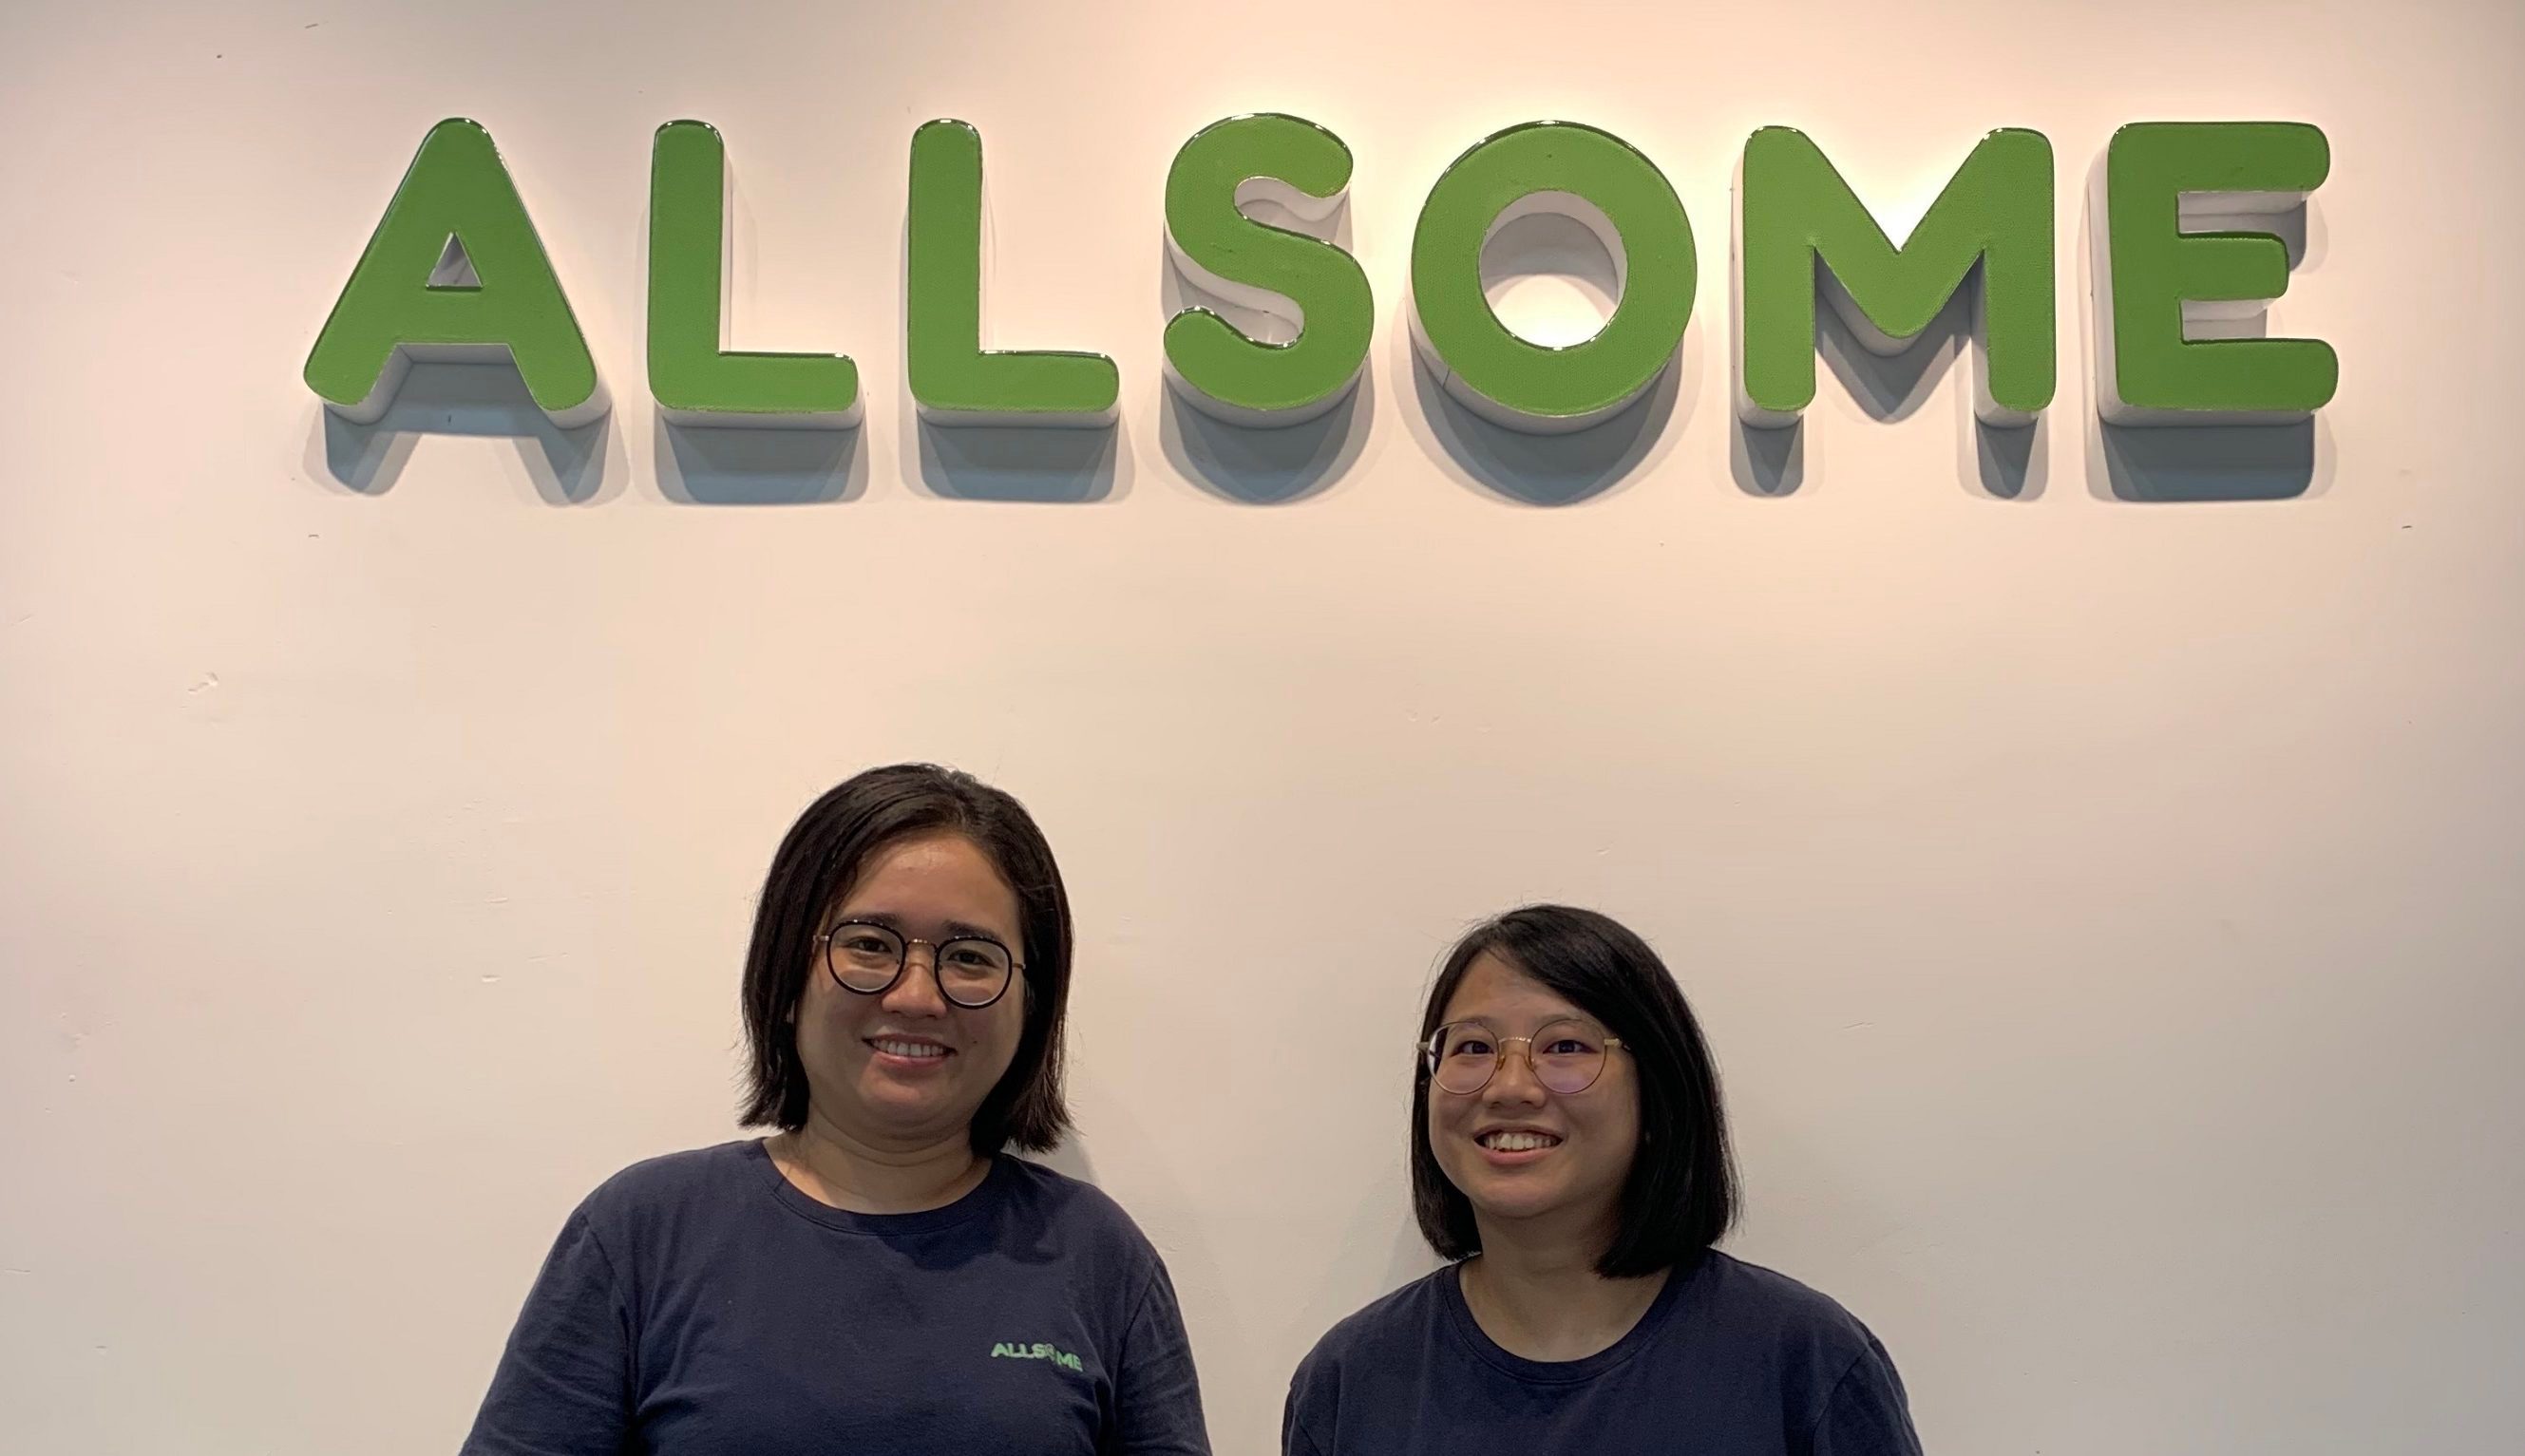 Malaysia's AllSome Fulfillment secures $1.94m led by East Ventures